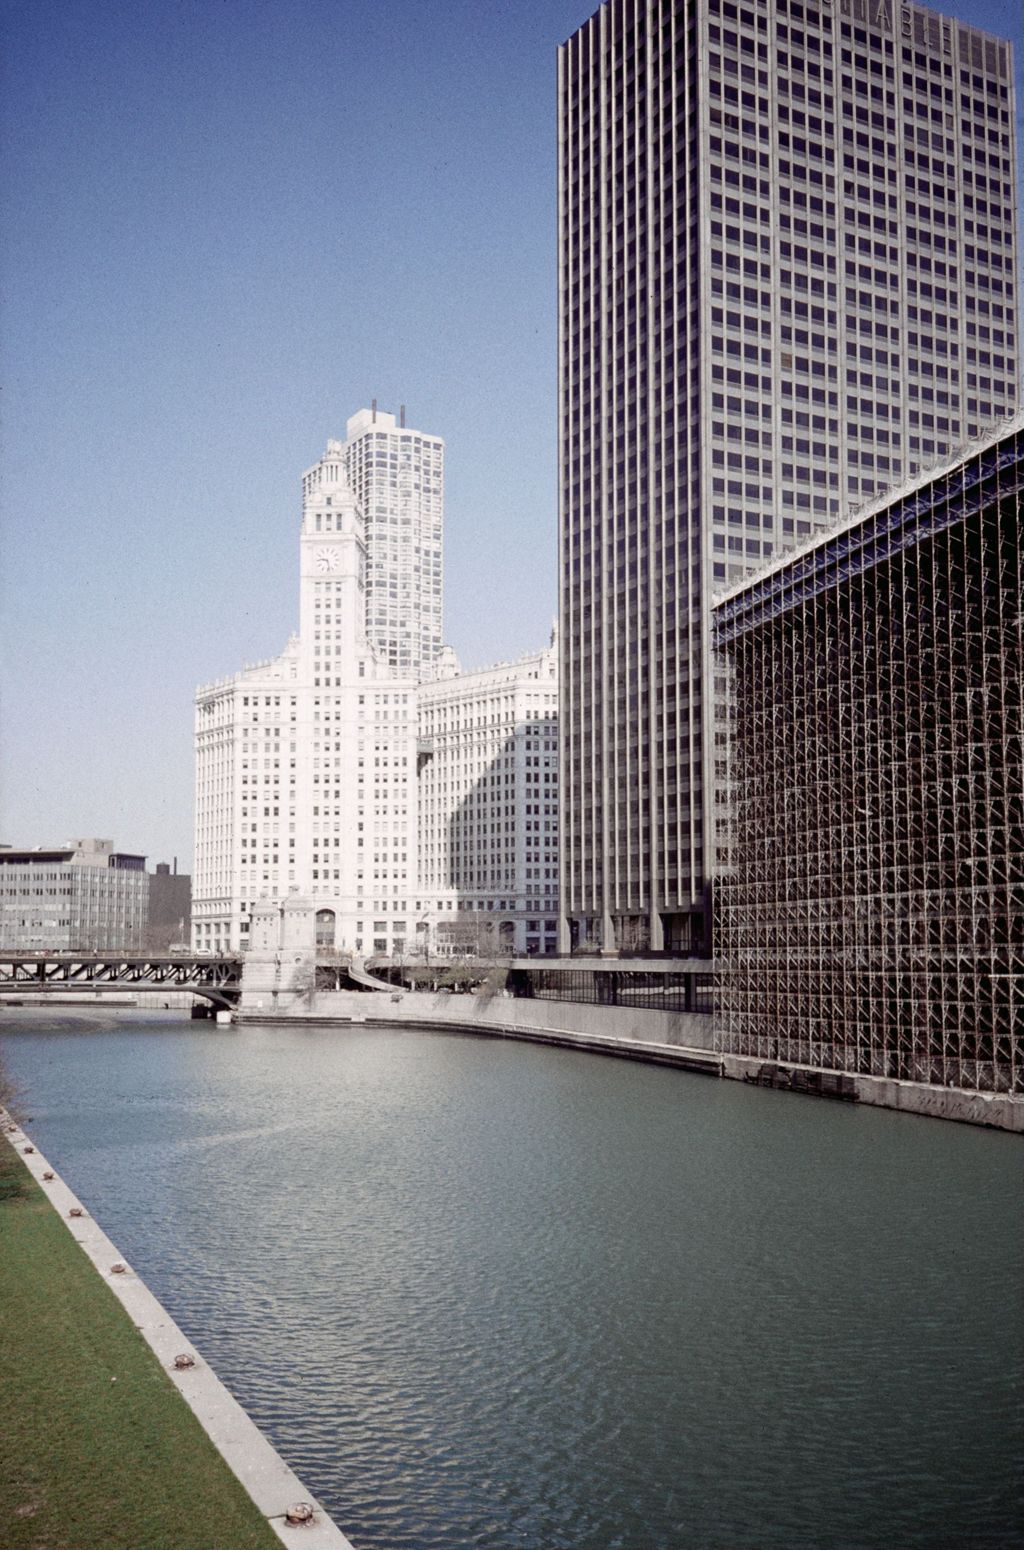 Miniature of High-rise buildings along the Chicago River